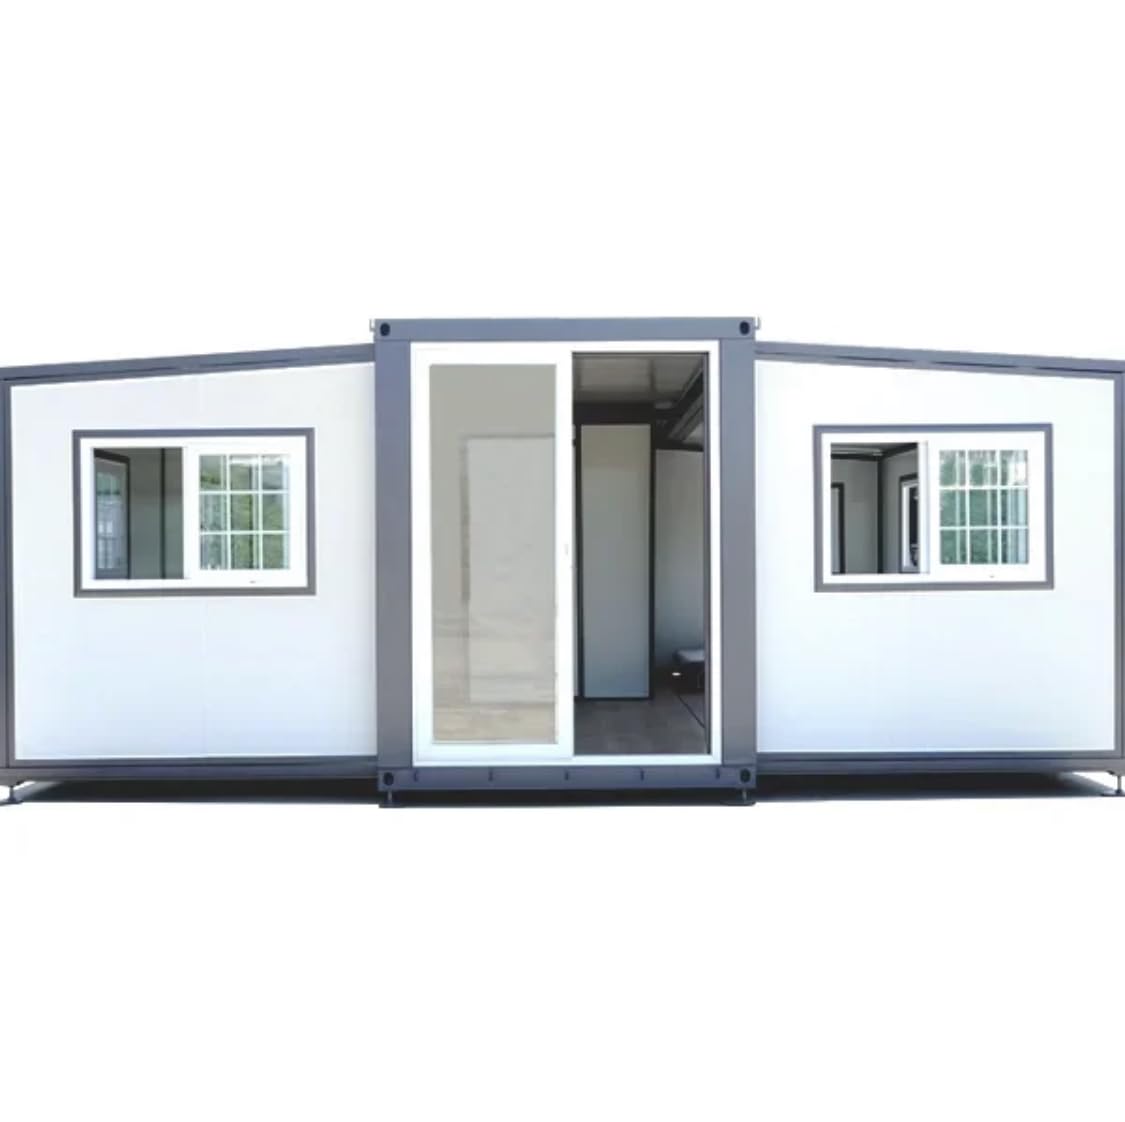 Cherry Industrial Expandable Movable Prefab House 19ft*20ft 2024 with Cabinet,Exquisitely Designed Modern Villa Prefab House for Live,Work.